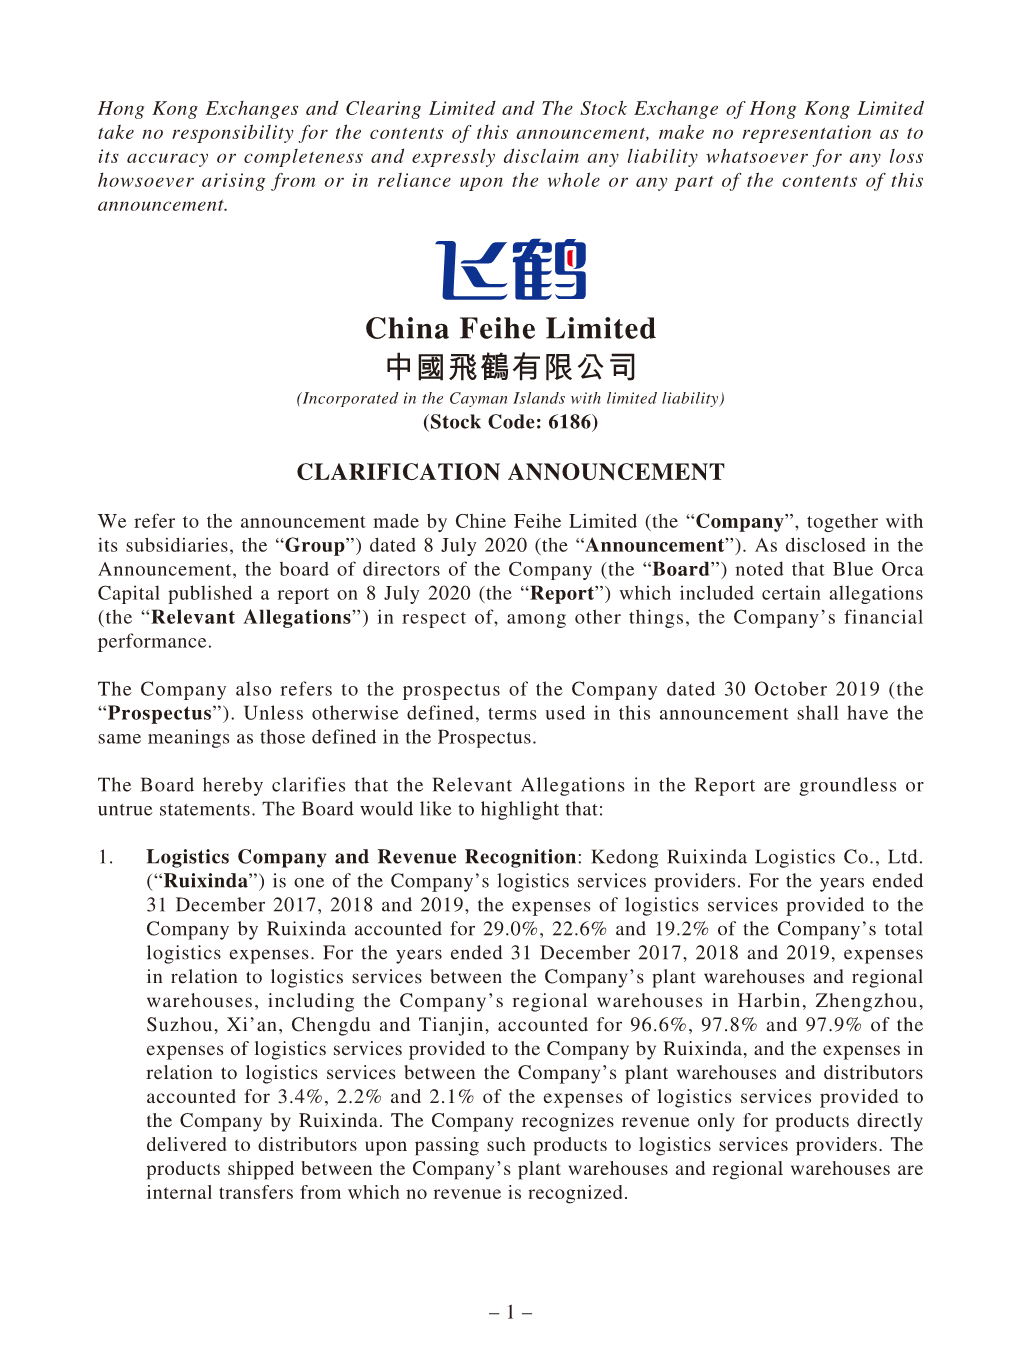 China Feihe Limited 中國飛鶴有限公司 (Incorporated in the Cayman Islands with Limited Liability) (Stock Code: 6186)